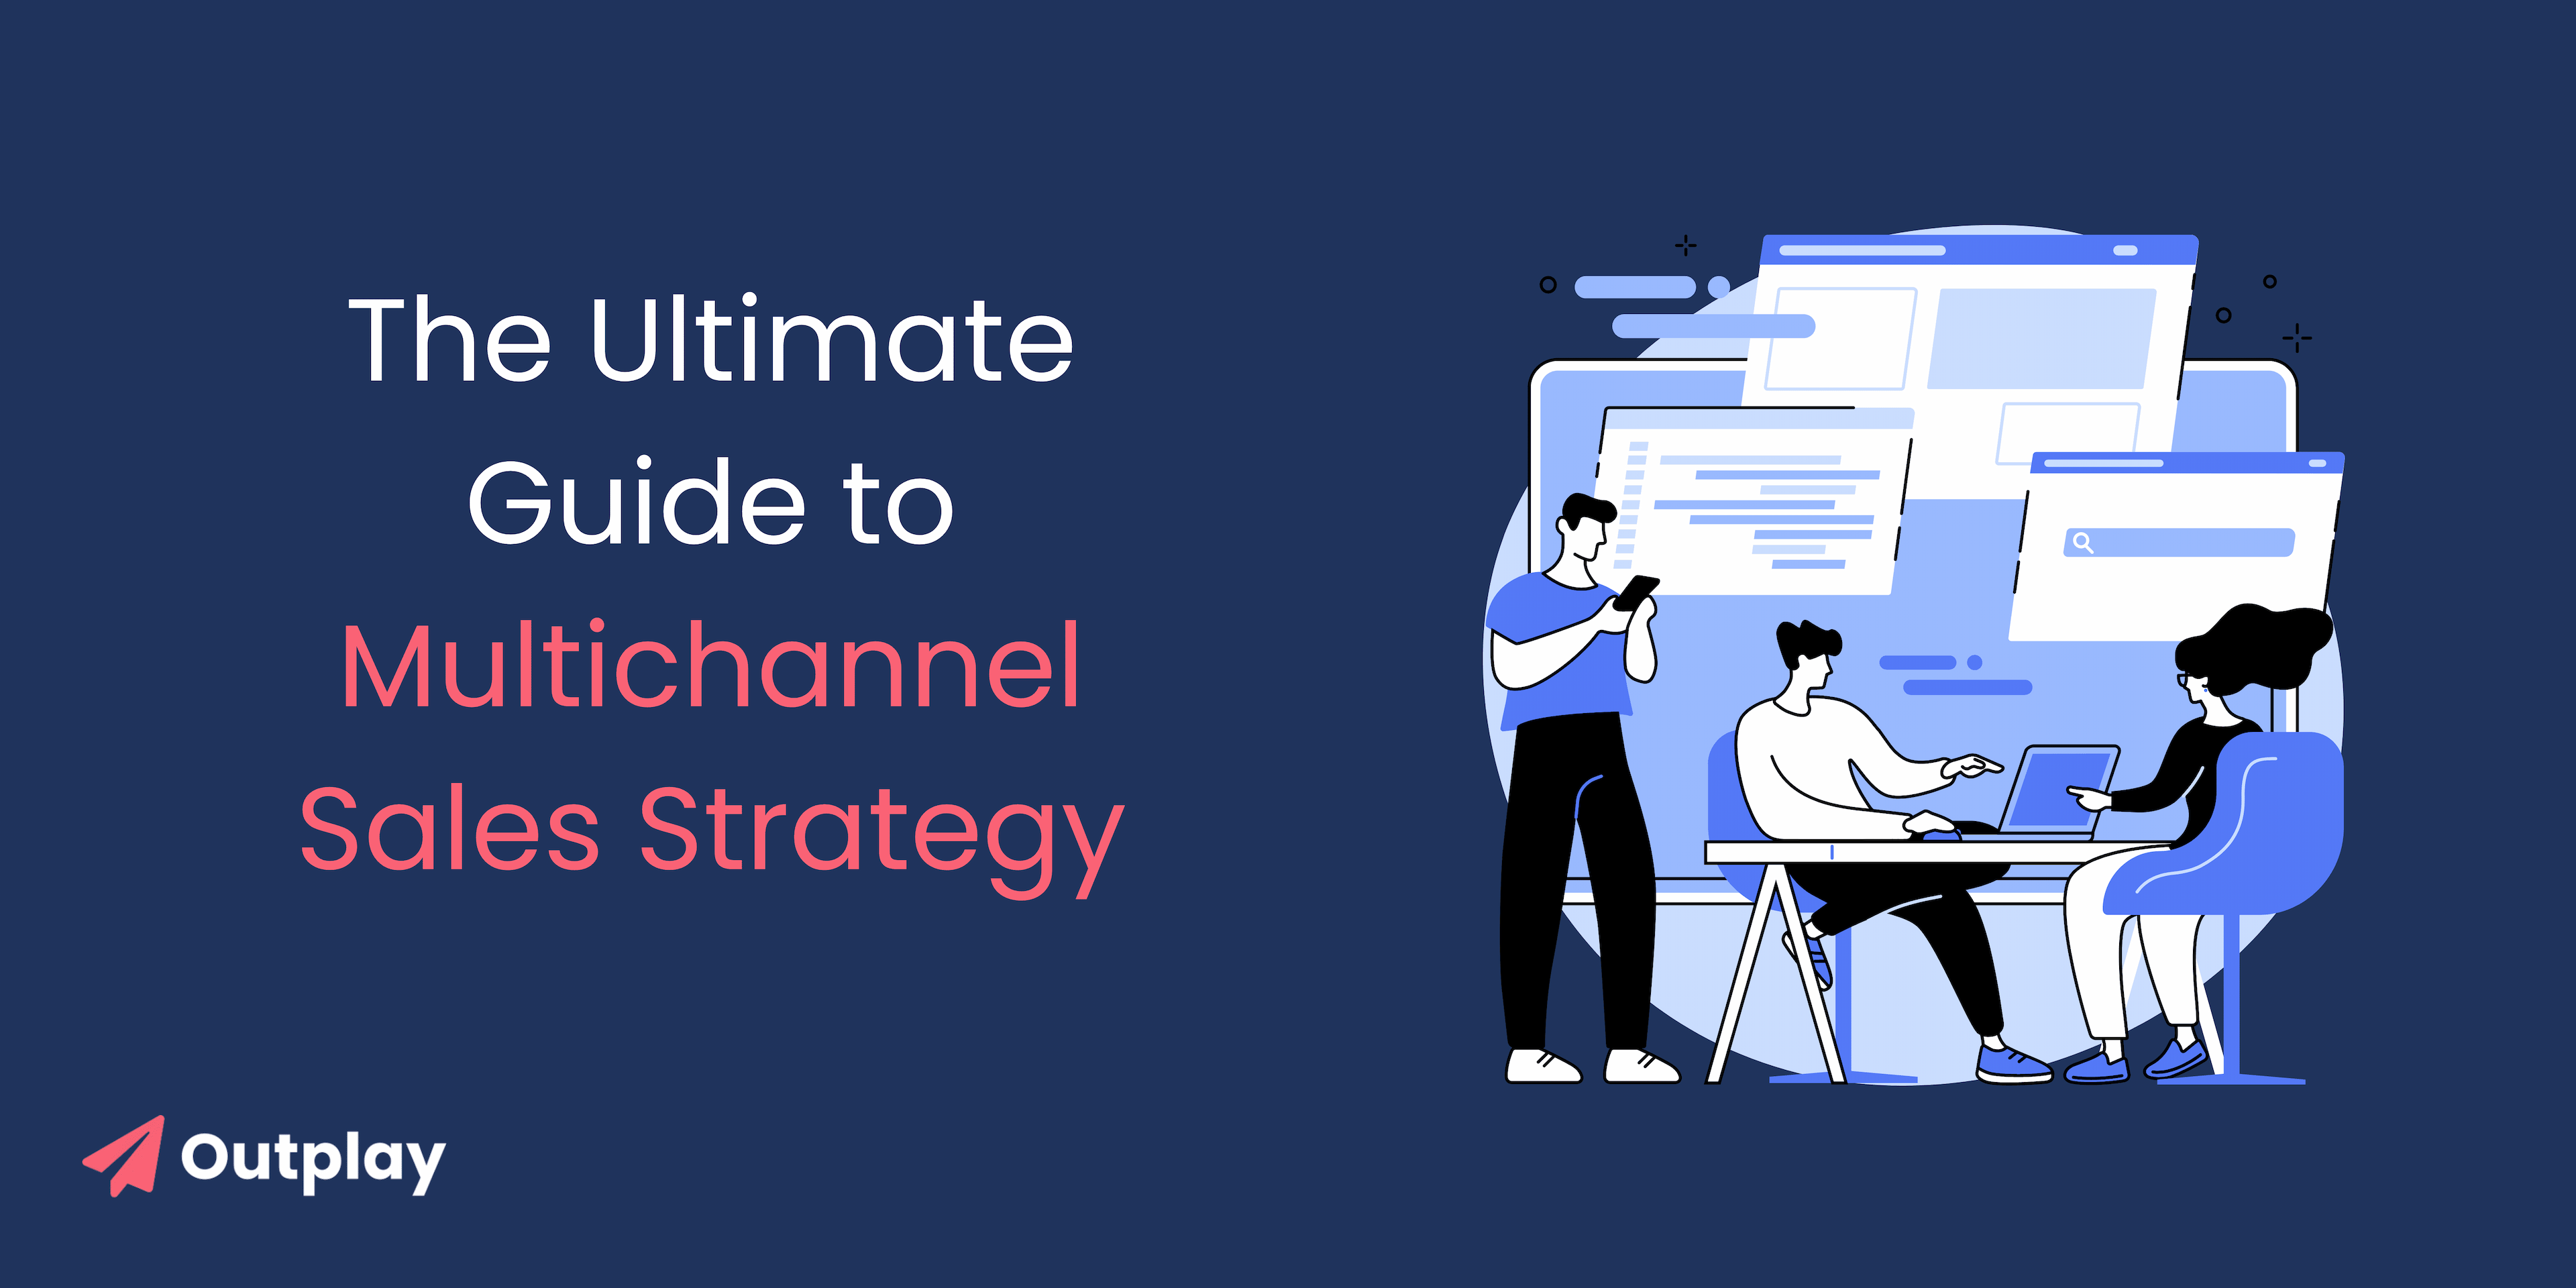 The Ultimate Guide to Multichannel Sales Strategy